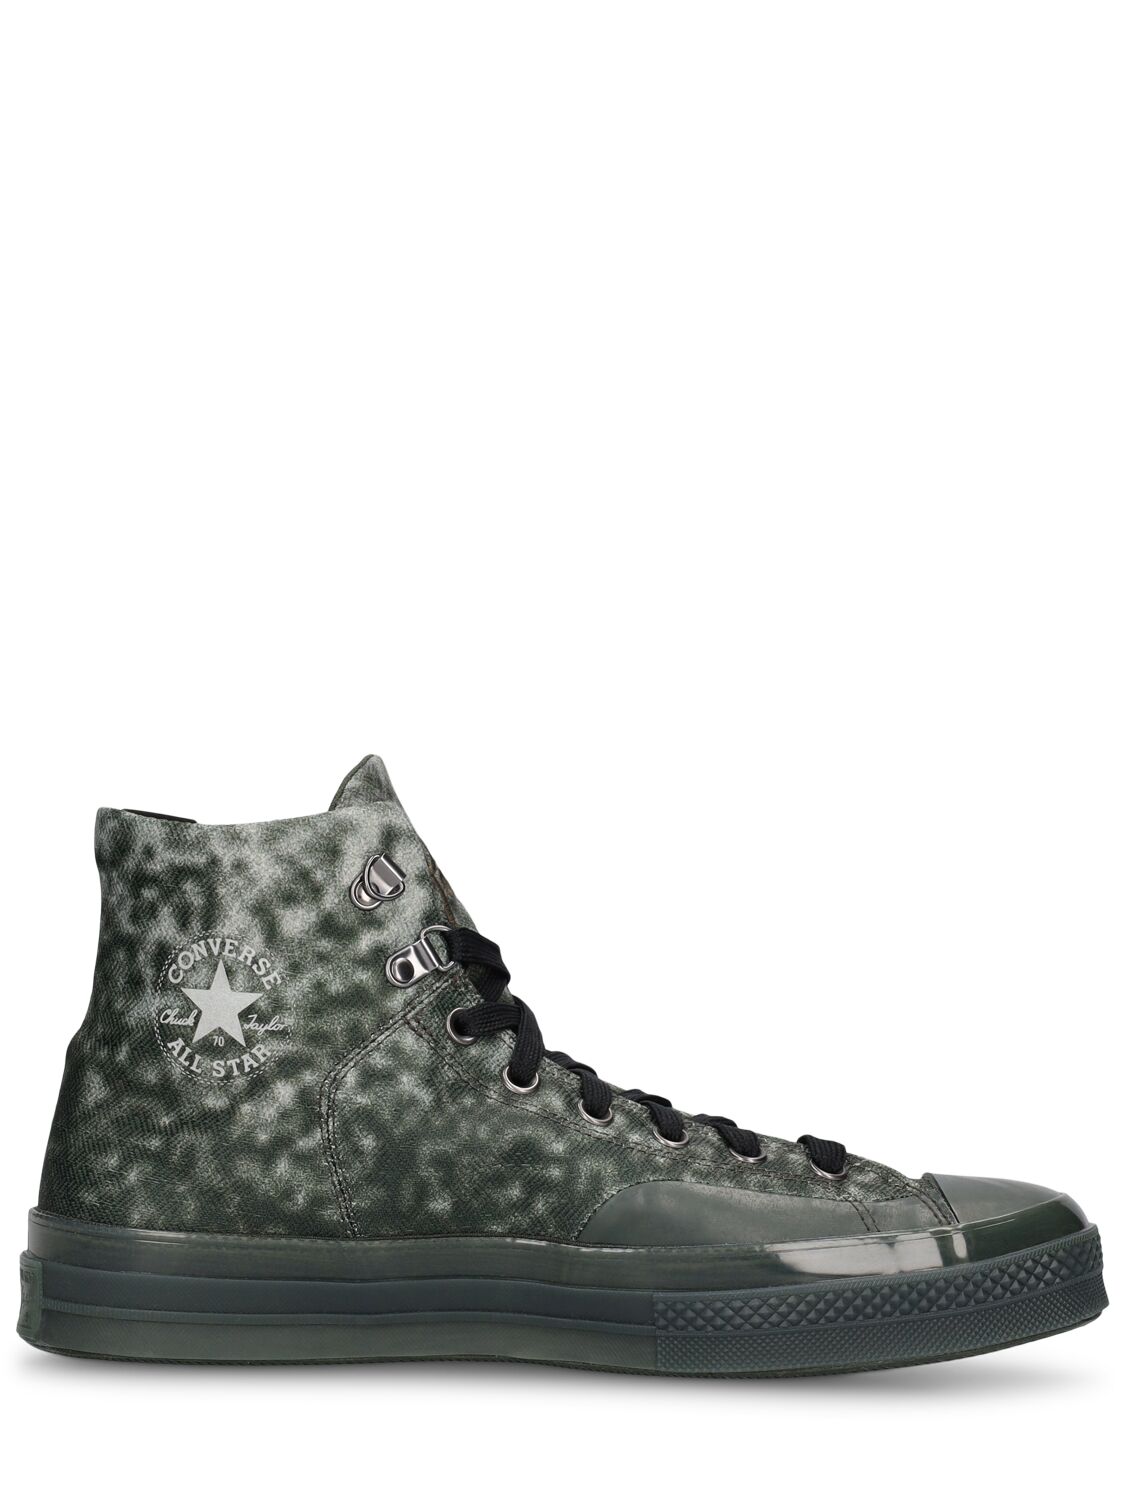 Image of Patta Chuck 70 Marquis Hi Sneakers